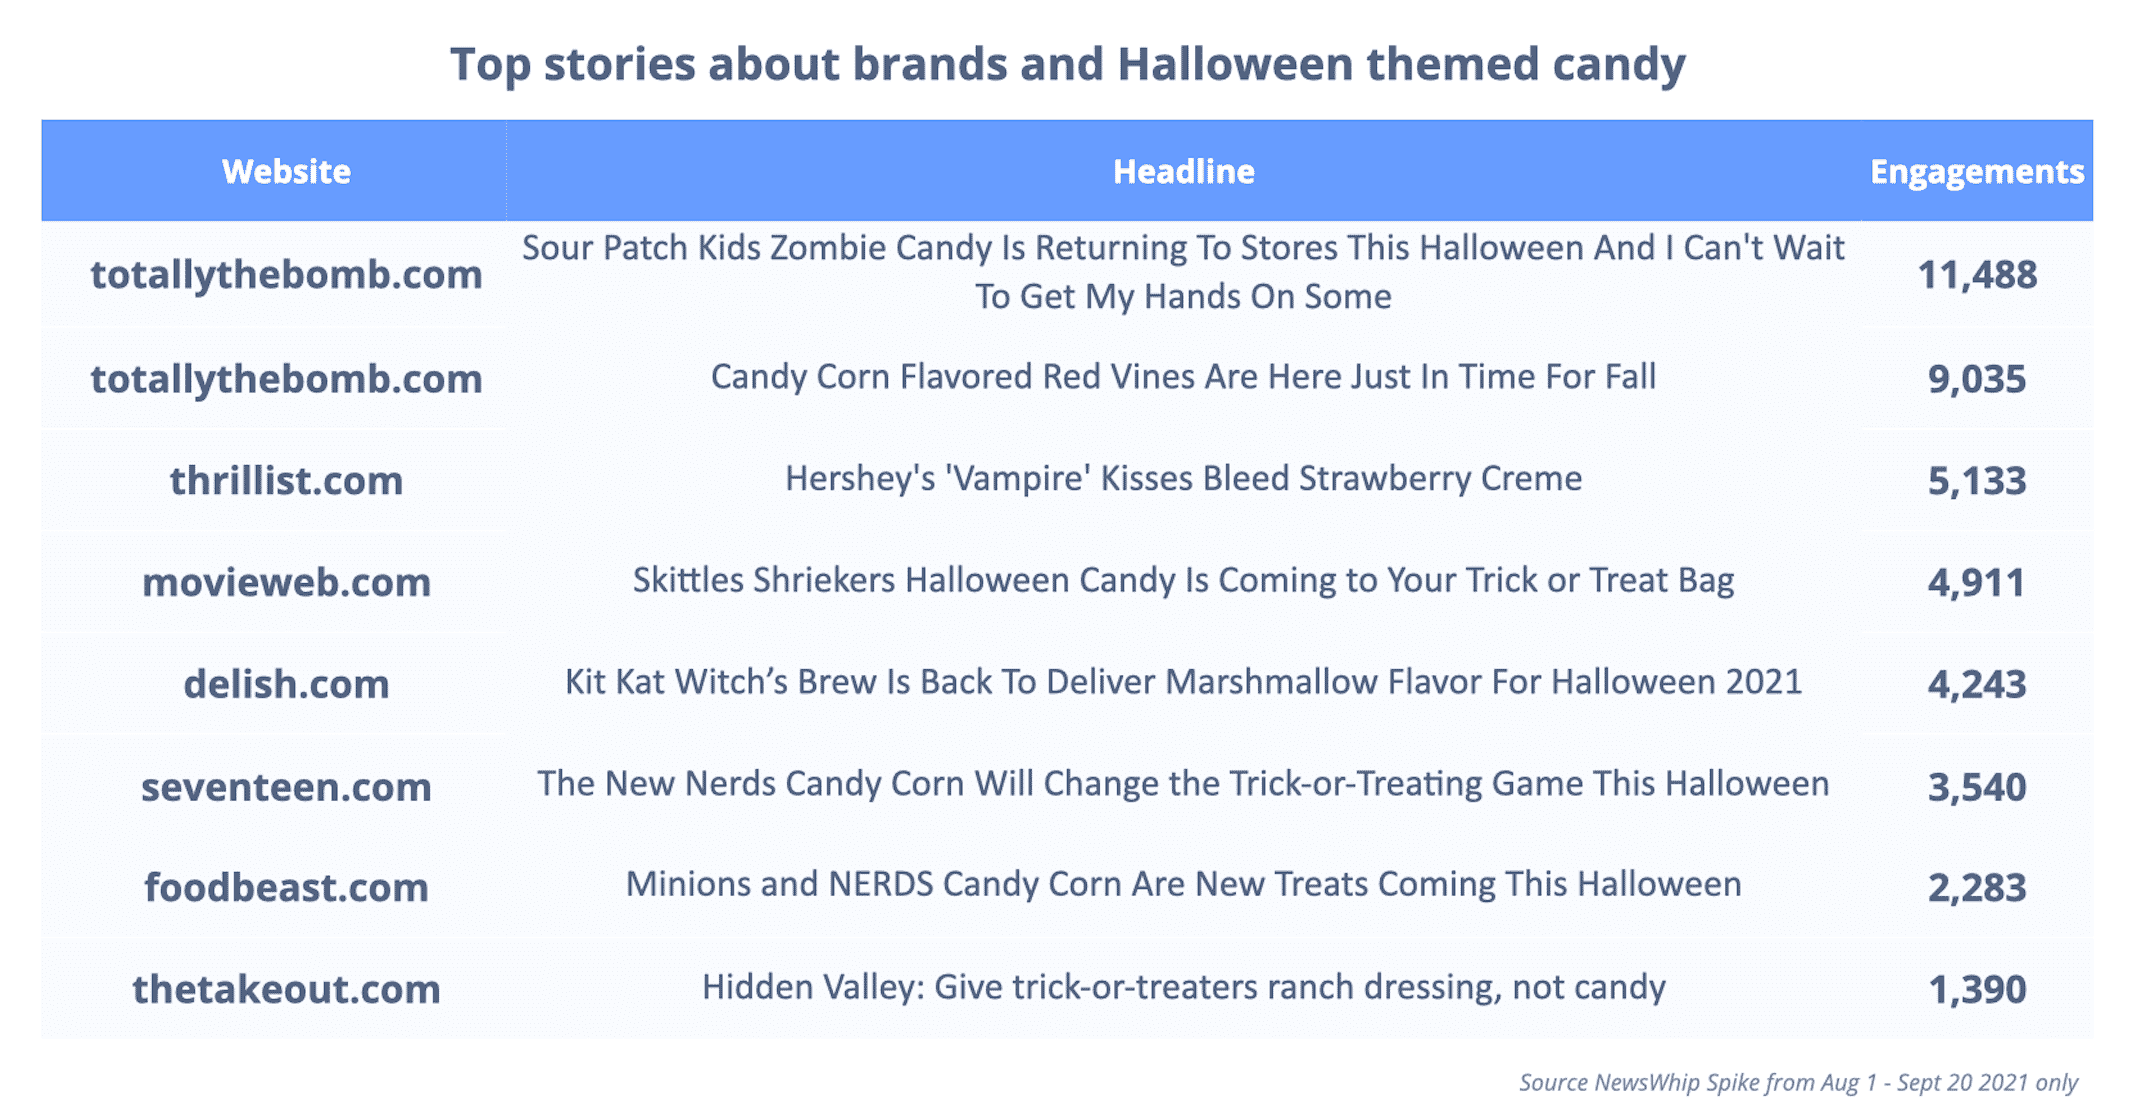 Chart showing the top stories about brands and halloween themed candy